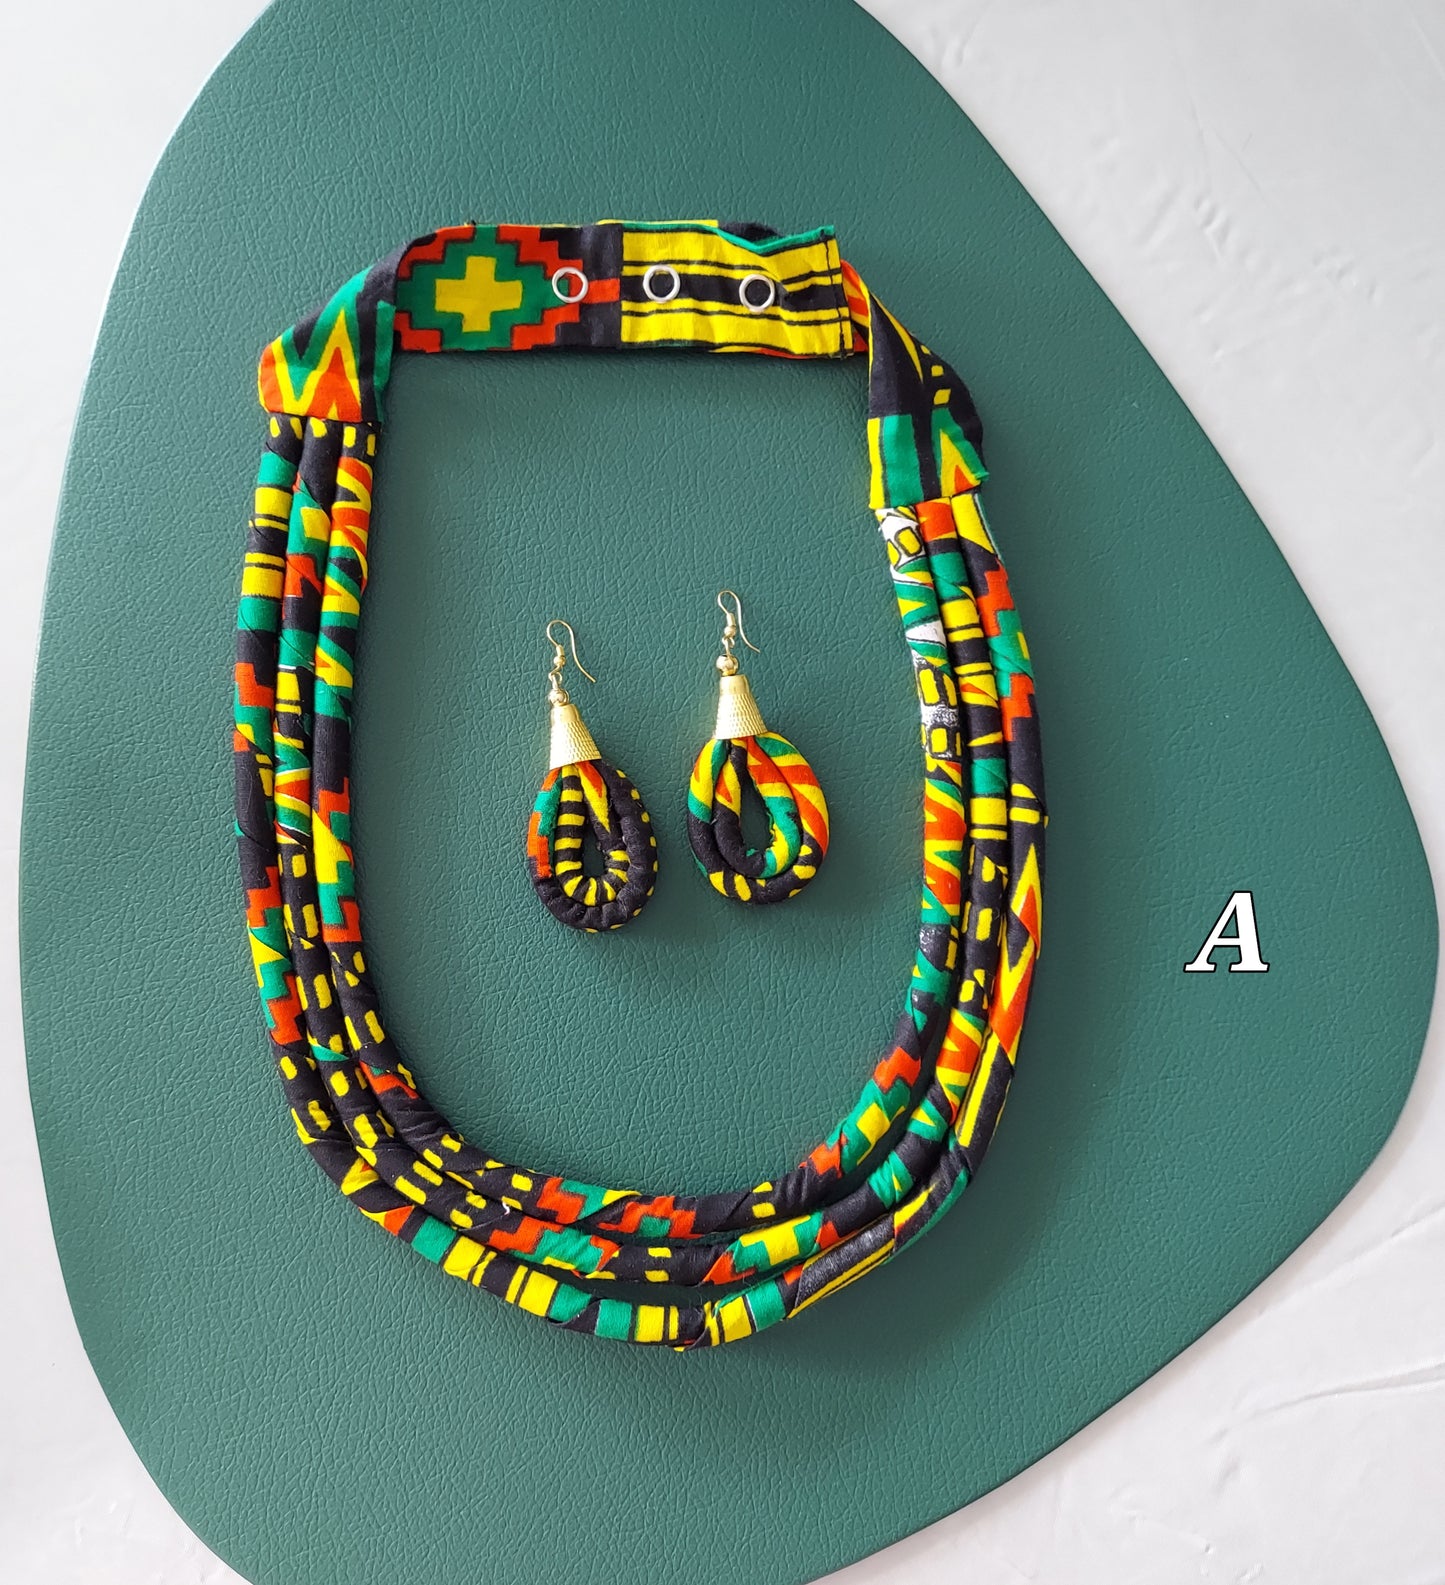 3 Layered Fabric Necklace & Earrings Set